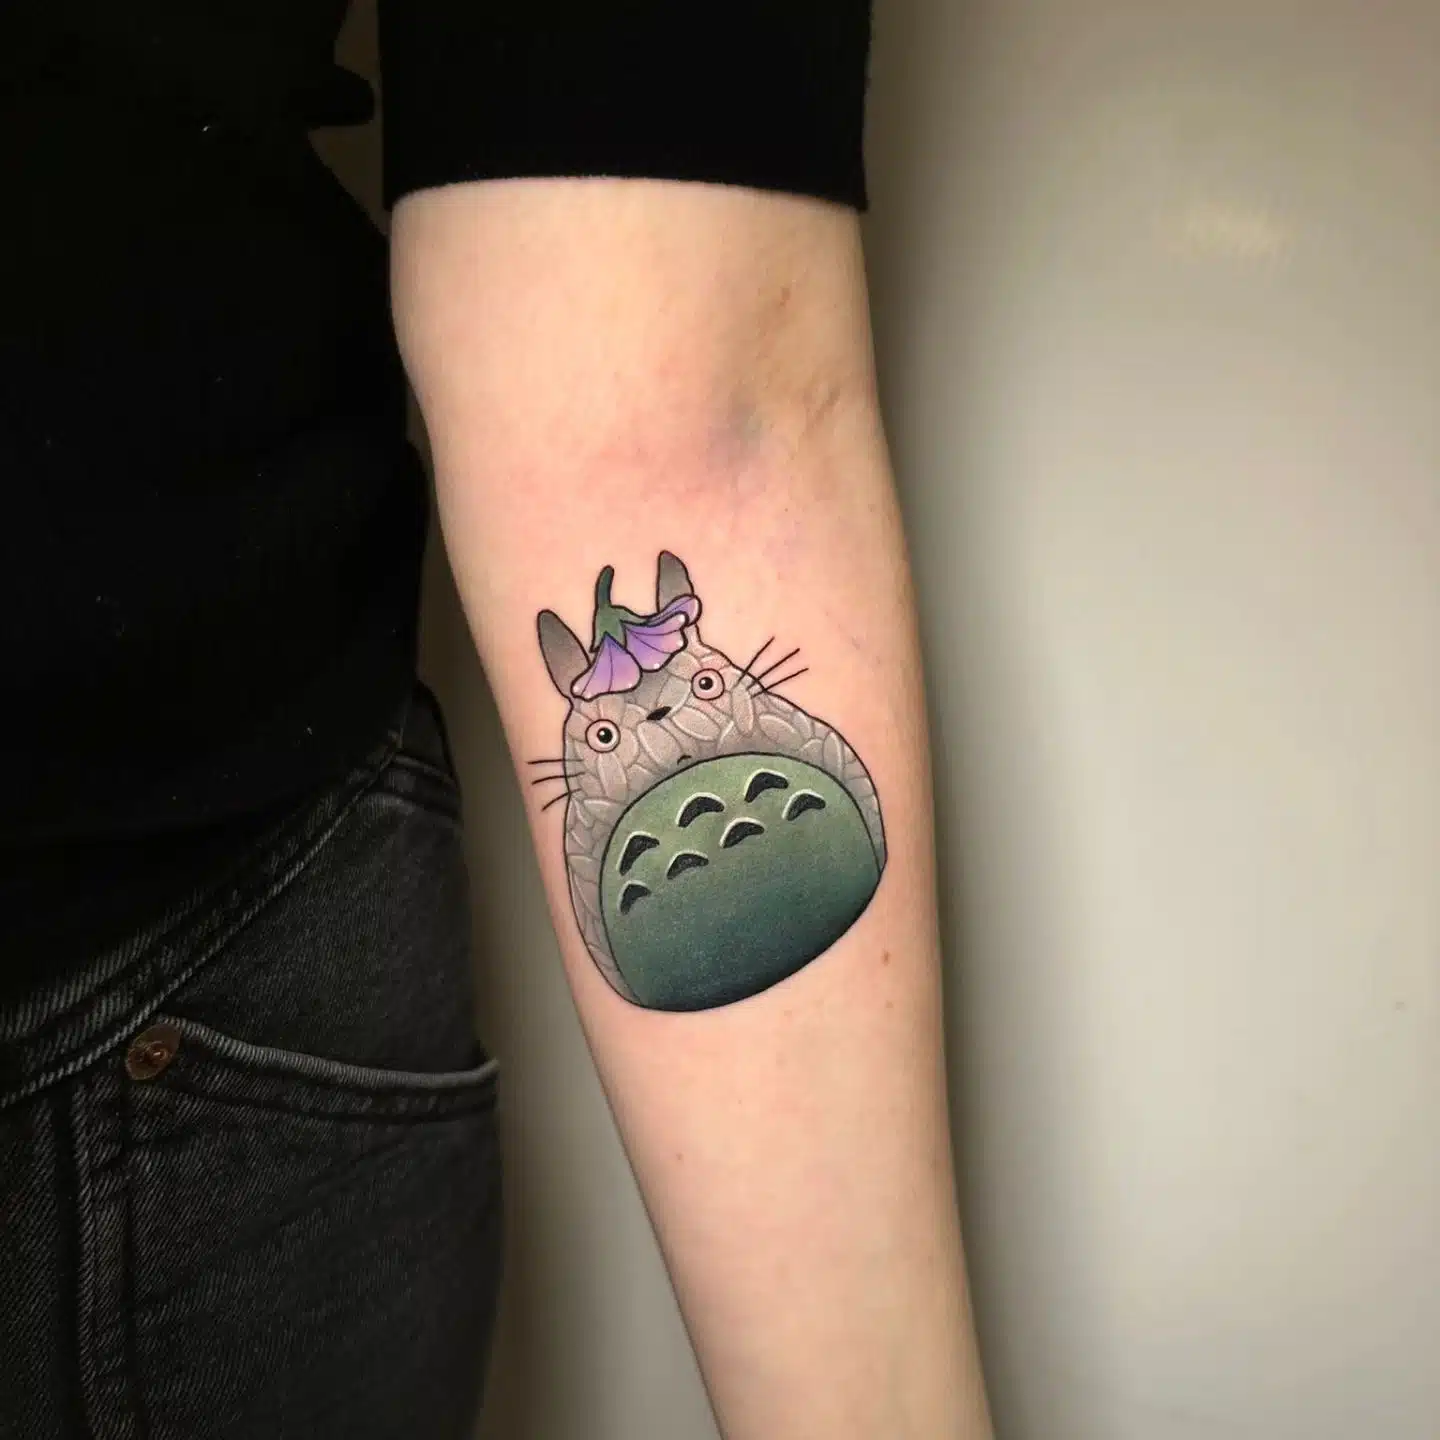 Totoro! We absolutely love doing Ghibli pieces, this was by Noemi for the fabulous Fabienne!
noemi_tattoo 

Supplies by our sponsors:
magnumtattoosupplies.uk 

Done using Noemis sponsor:
dragonhawkmachine 
dragonhawkofficial 

And with help from:
worldfamousink 
unigloves 
allegoryink 

totaltattoo uktta tattoosnob 
                  